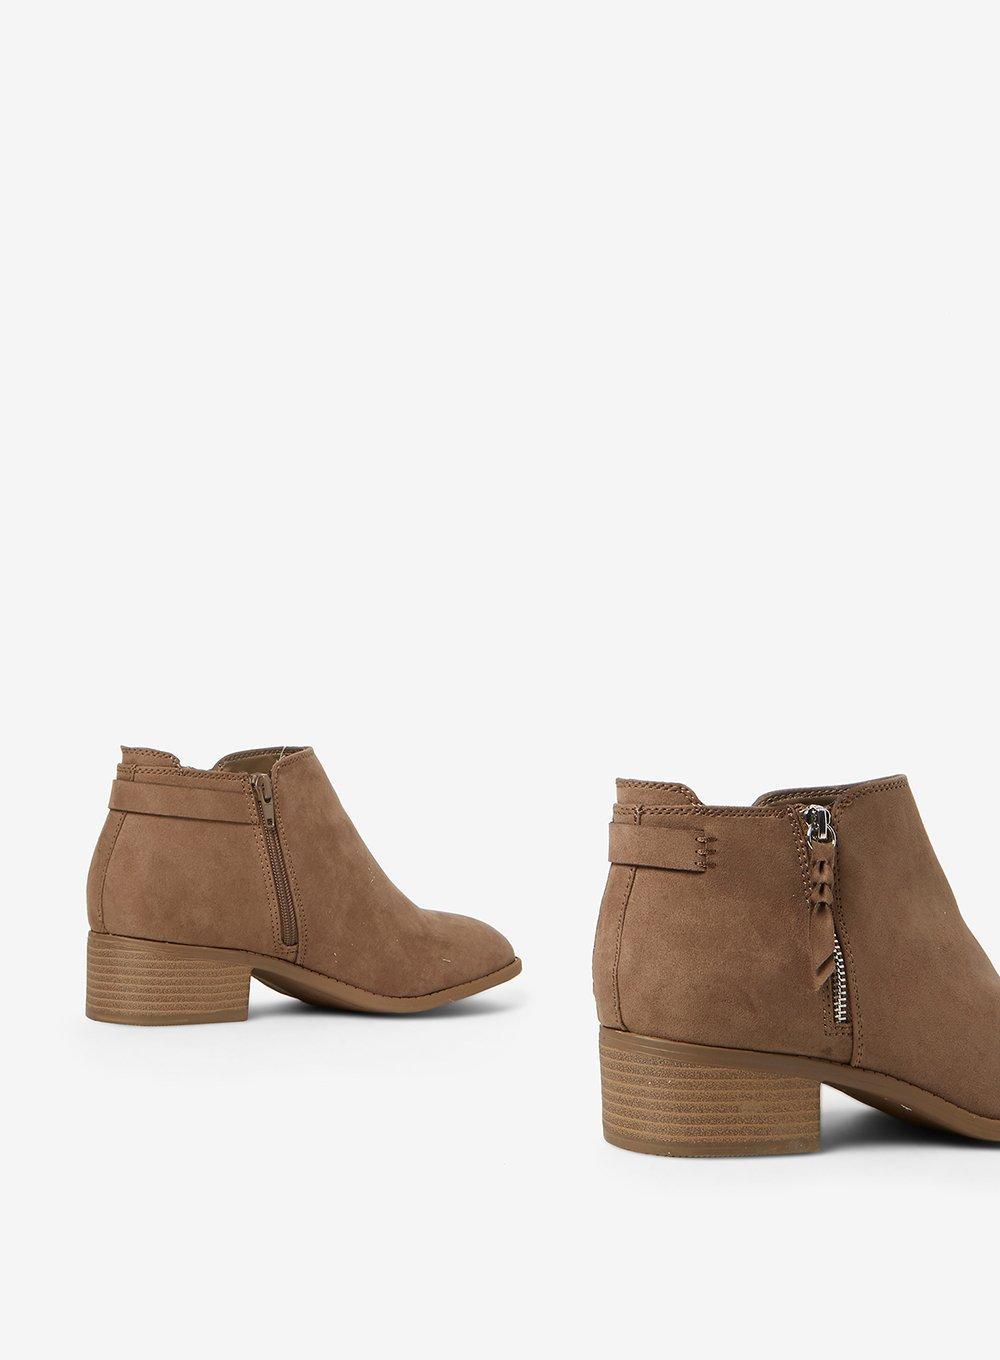 dorothy perkins major ankle boots